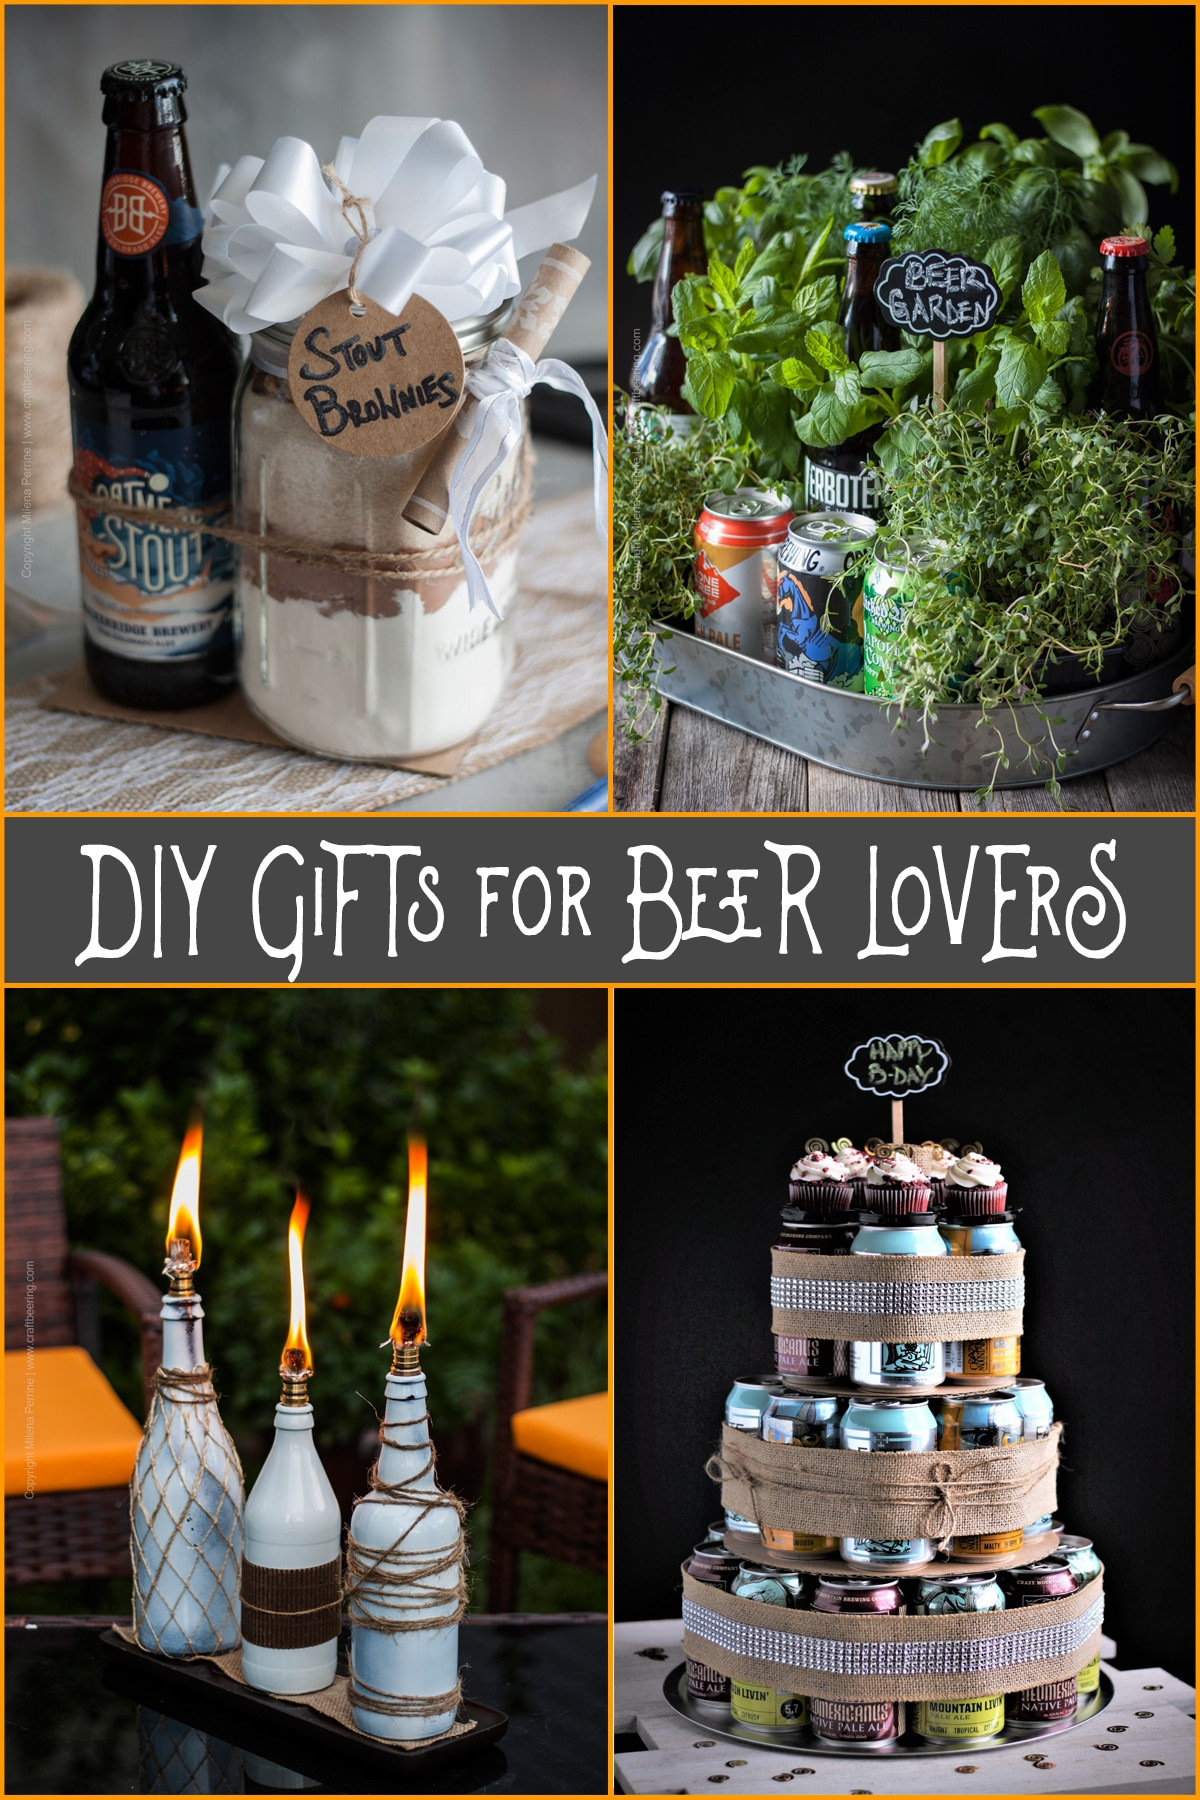 Craft Beer Gift Ideas
 DIY Gifts for Beer Lovers A Round of Creative Ideas